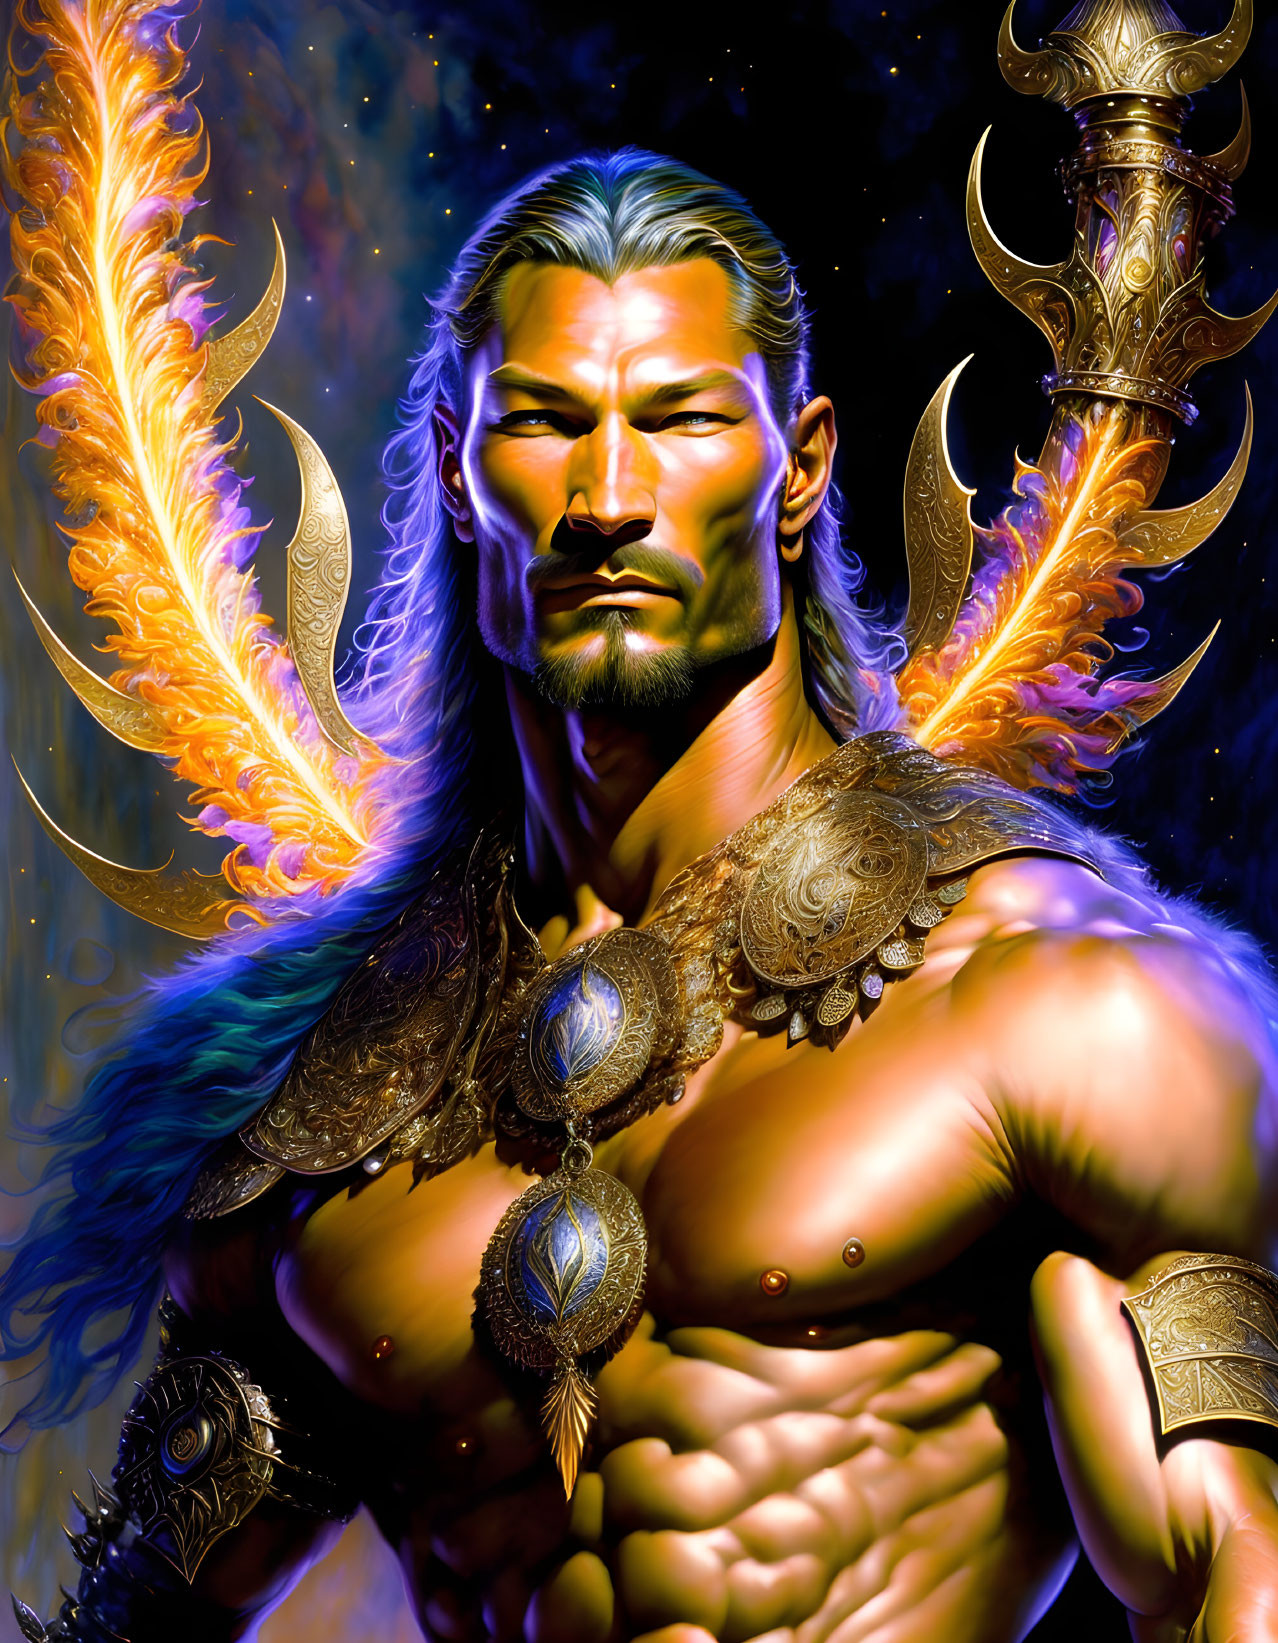 Muscular fantasy character with phoenix wings in intricate armor